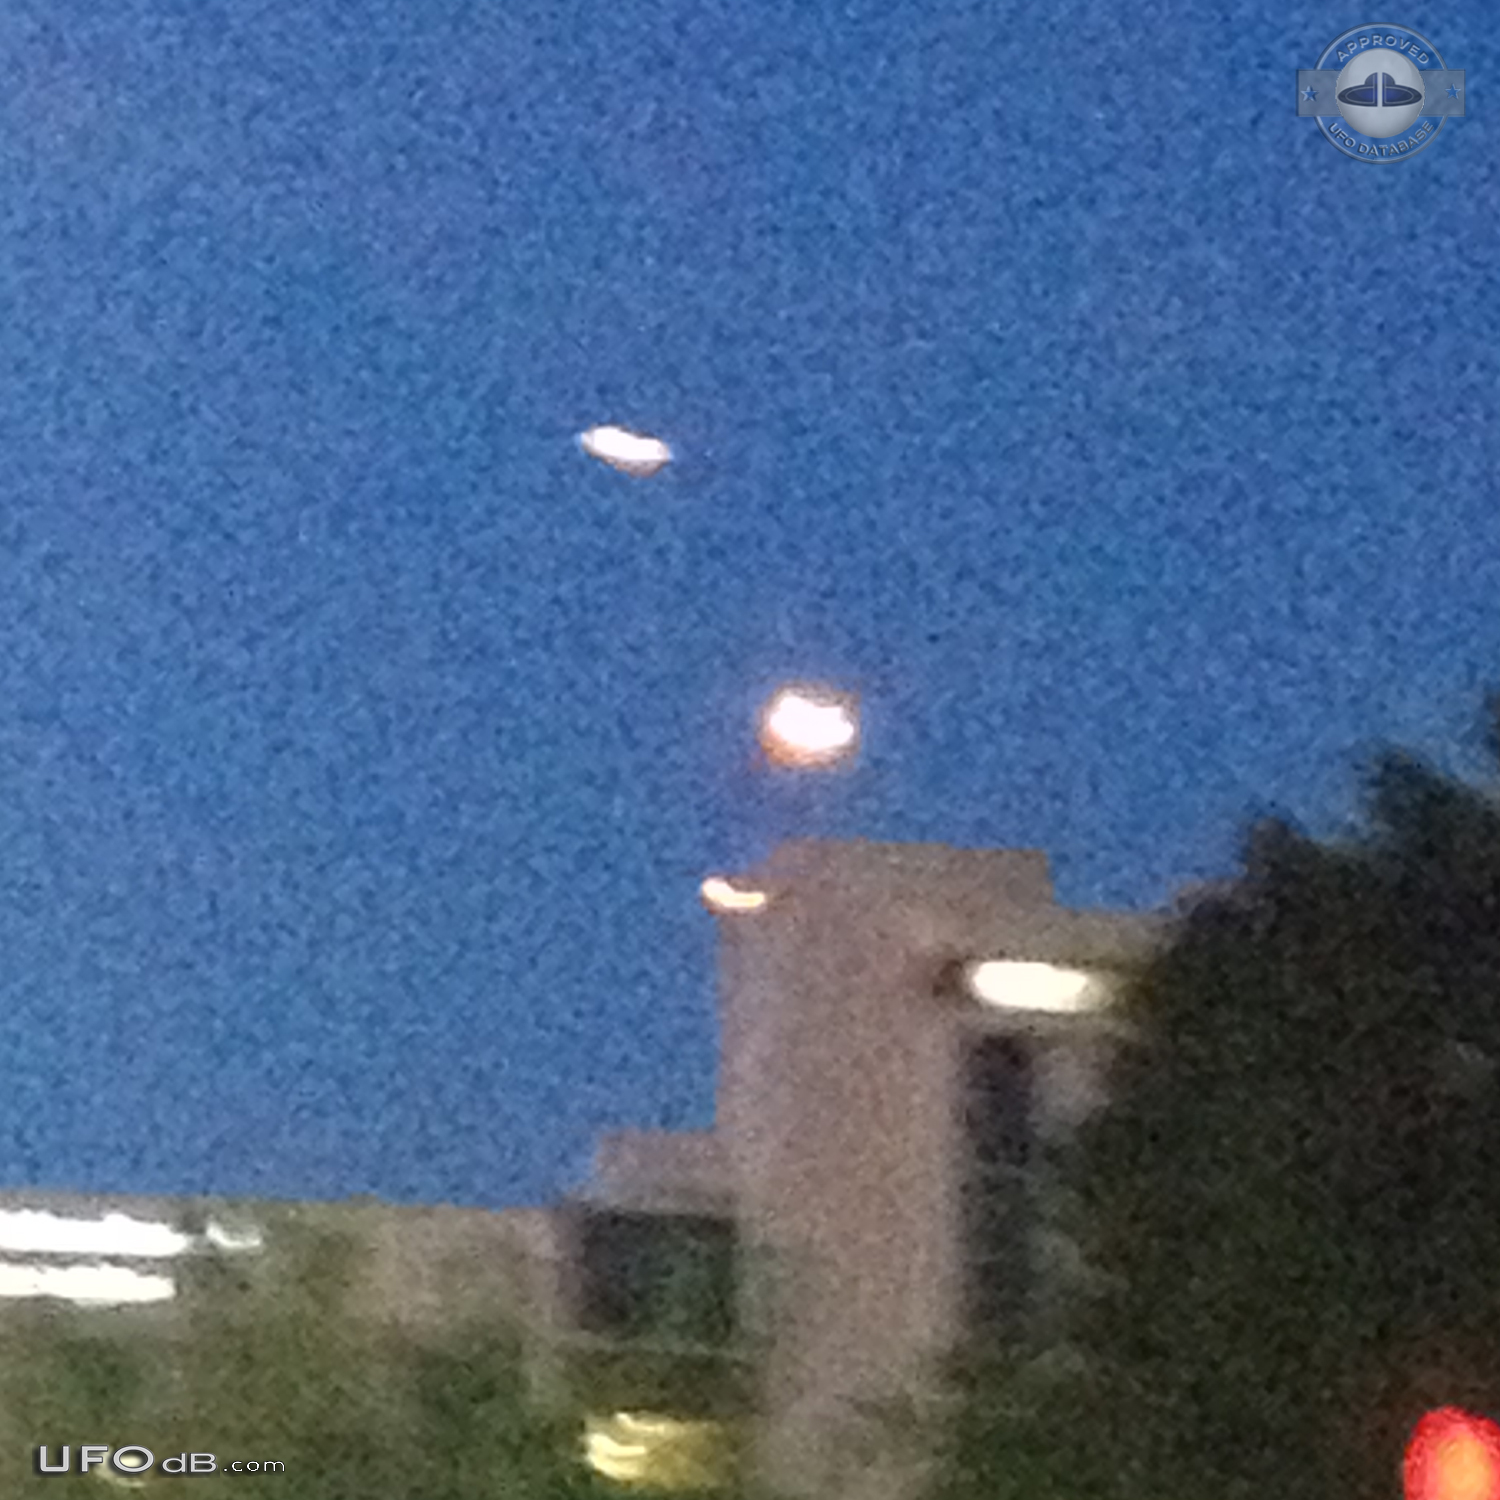 Luminescent dome shaped UFO with red light at its base Los Angeles USA UFO Picture #730-4